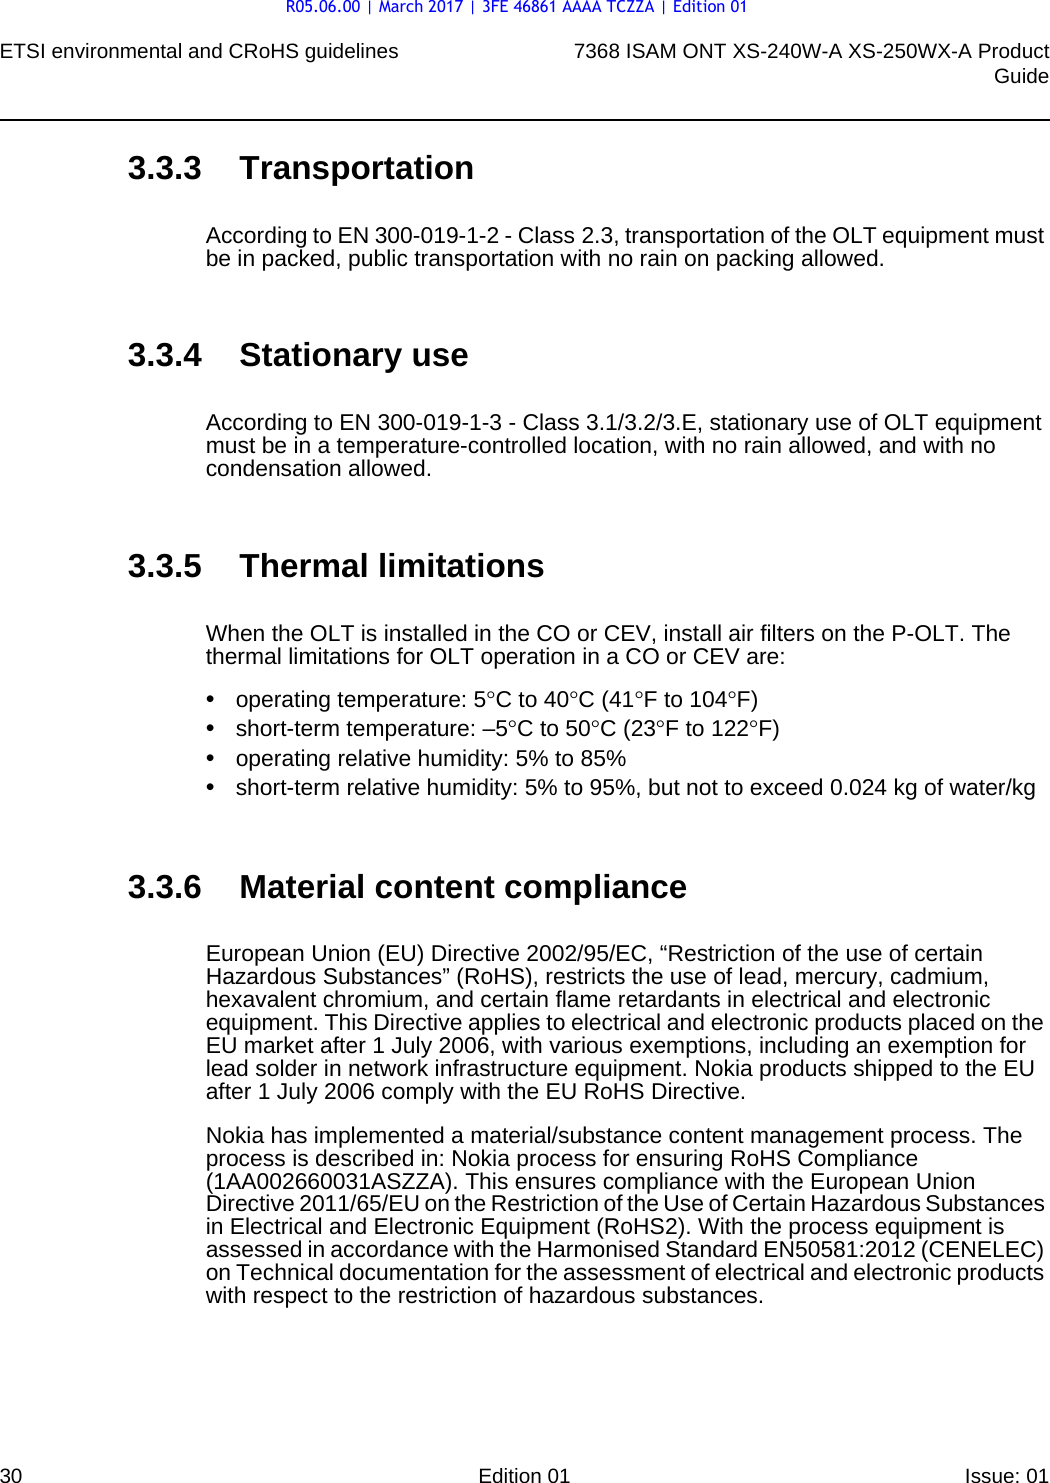 ETSI environmental and CRoHS guidelines307368 ISAM ONT XS-240W-A XS-250WX-A ProductGuideEdition 01 Issue: 01 3.3.3 TransportationAccording to EN 300-019-1-2 - Class 2.3, transportation of the OLT equipment must be in packed, public transportation with no rain on packing allowed.3.3.4 Stationary useAccording to EN 300-019-1-3 - Class 3.1/3.2/3.E, stationary use of OLT equipment must be in a temperature-controlled location, with no rain allowed, and with no condensation allowed.3.3.5 Thermal limitationsWhen the OLT is installed in the CO or CEV, install air filters on the P-OLT. The thermal limitations for OLT operation in a CO or CEV are:•operating temperature: 5°C to 40°C (41°F to 104°F)•short-term temperature: –5°C to 50°C (23°F to 122°F)•operating relative humidity: 5% to 85%•short-term relative humidity: 5% to 95%, but not to exceed 0.024 kg of water/kg3.3.6 Material content complianceEuropean Union (EU) Directive 2002/95/EC, “Restriction of the use of certain Hazardous Substances” (RoHS), restricts the use of lead, mercury, cadmium, hexavalent chromium, and certain flame retardants in electrical and electronic equipment. This Directive applies to electrical and electronic products placed on the EU market after 1 July 2006, with various exemptions, including an exemption for lead solder in network infrastructure equipment. Nokia products shipped to the EU after 1 July 2006 comply with the EU RoHS Directive.Nokia has implemented a material/substance content management process. The process is described in: Nokia process for ensuring RoHS Compliance (1AA002660031ASZZA). This ensures compliance with the European Union Directive 2011/65/EU on the Restriction of the Use of Certain Hazardous Substances in Electrical and Electronic Equipment (RoHS2). With the process equipment is assessed in accordance with the Harmonised Standard EN50581:2012 (CENELEC) on Technical documentation for the assessment of electrical and electronic products with respect to the restriction of hazardous substances.R05.06.00 | March 2017 | 3FE 46861 AAAA TCZZA | Edition 01